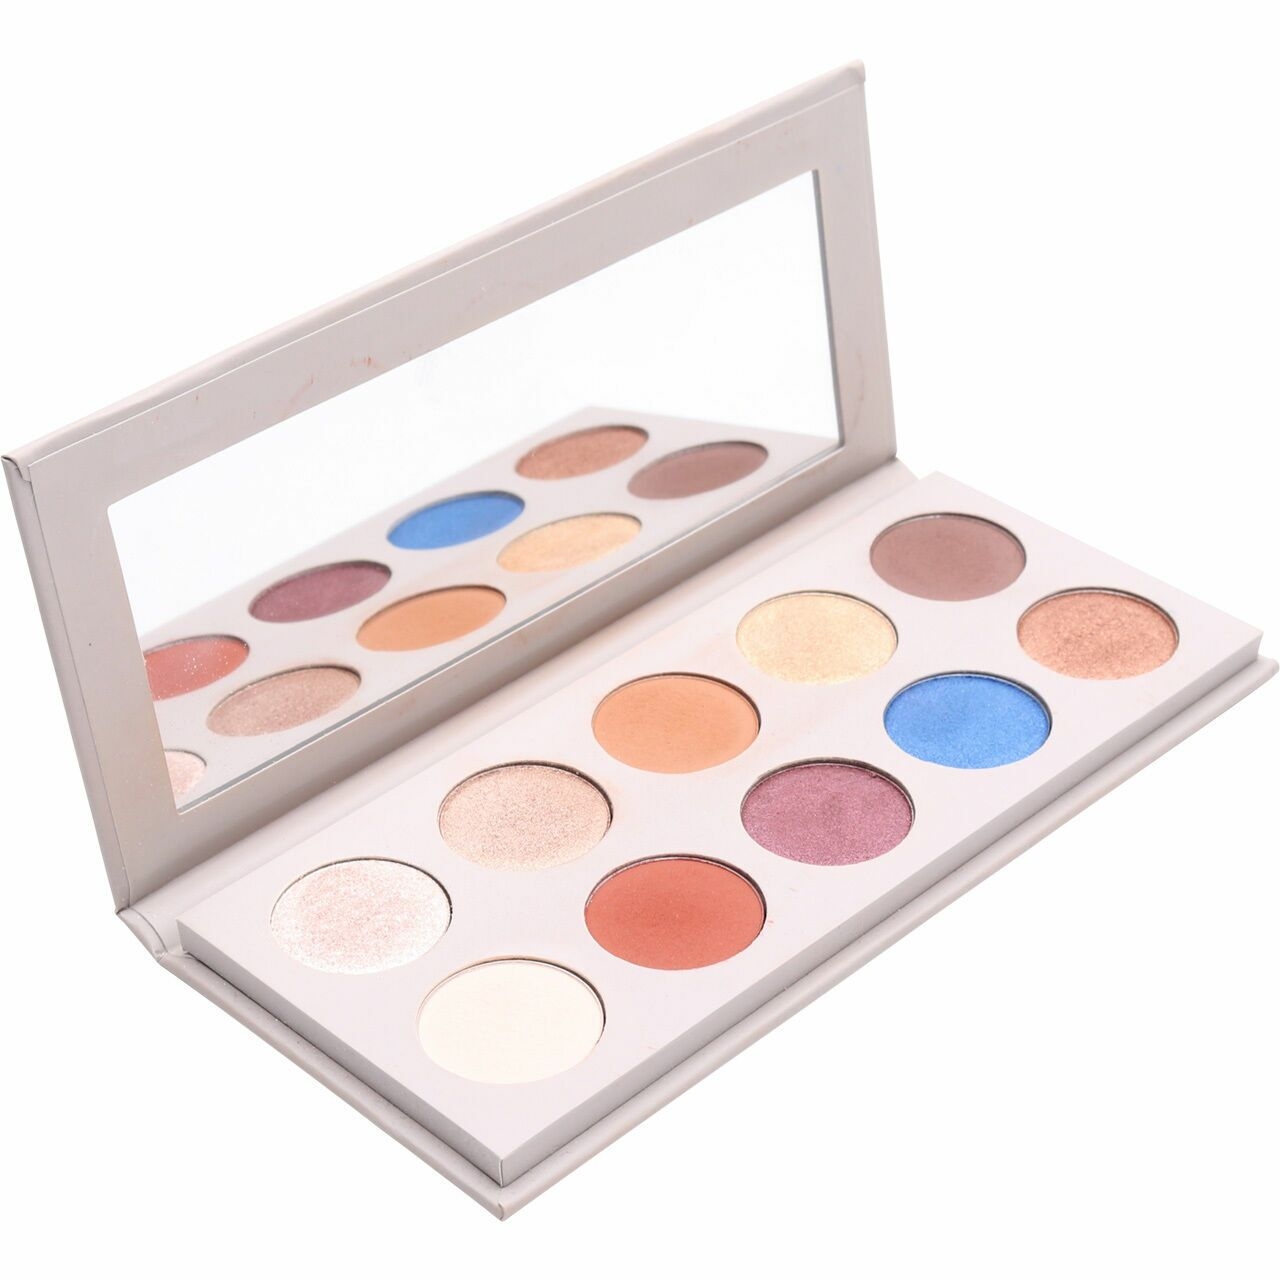 KKW x Mario Eyeshadow Sets and Palette